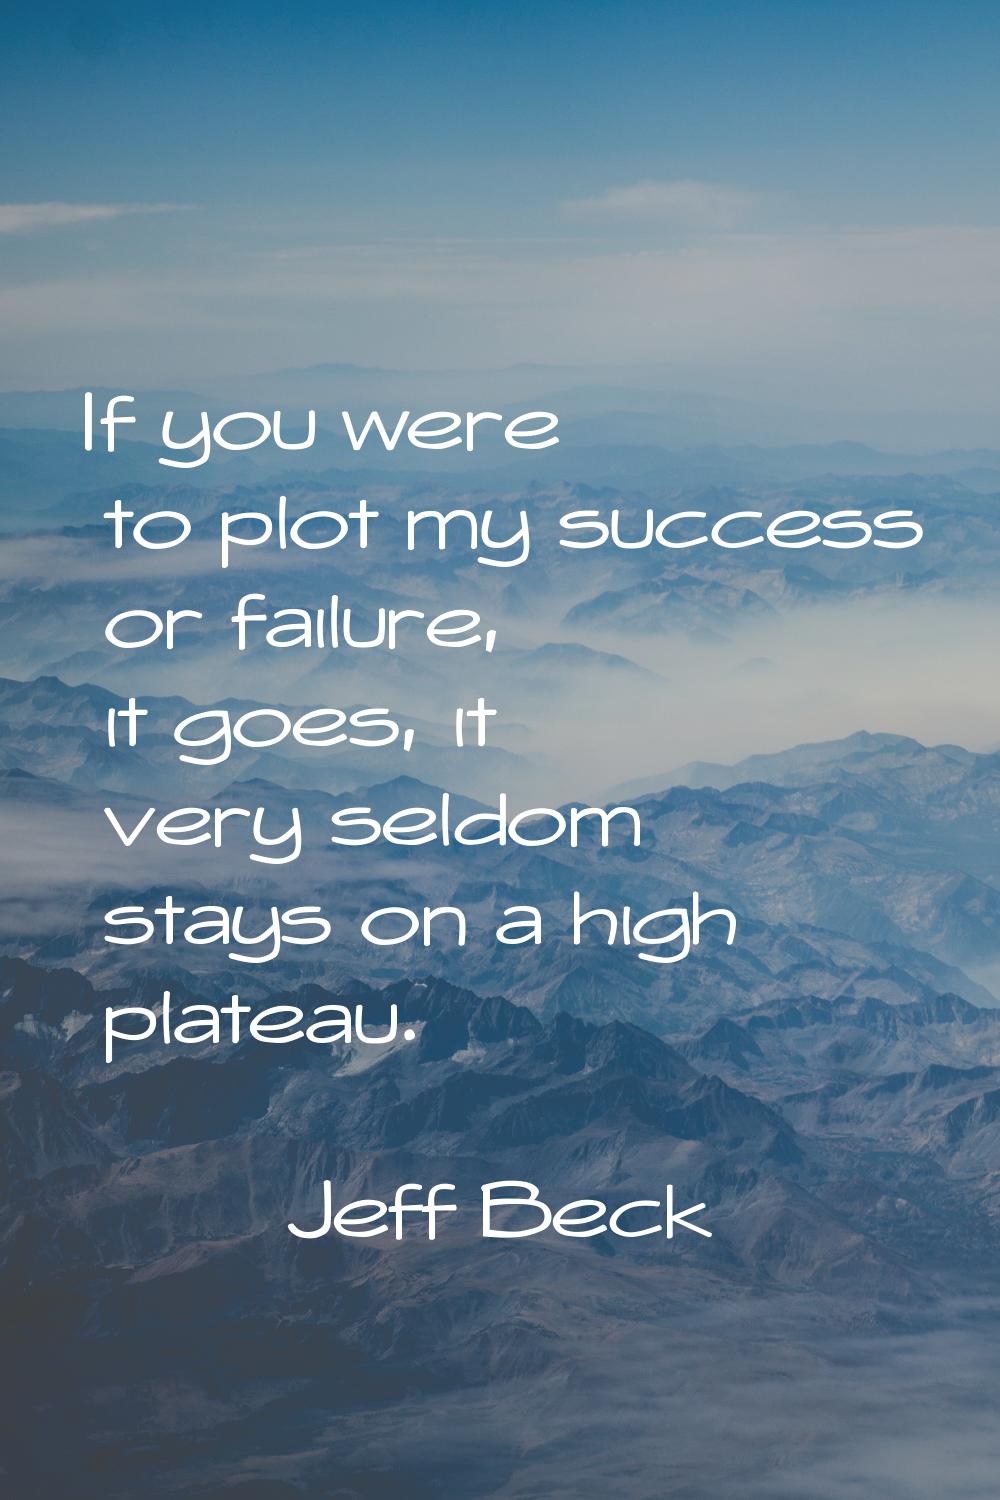 If you were to plot my success or failure, it goes, it very seldom stays on a high plateau.